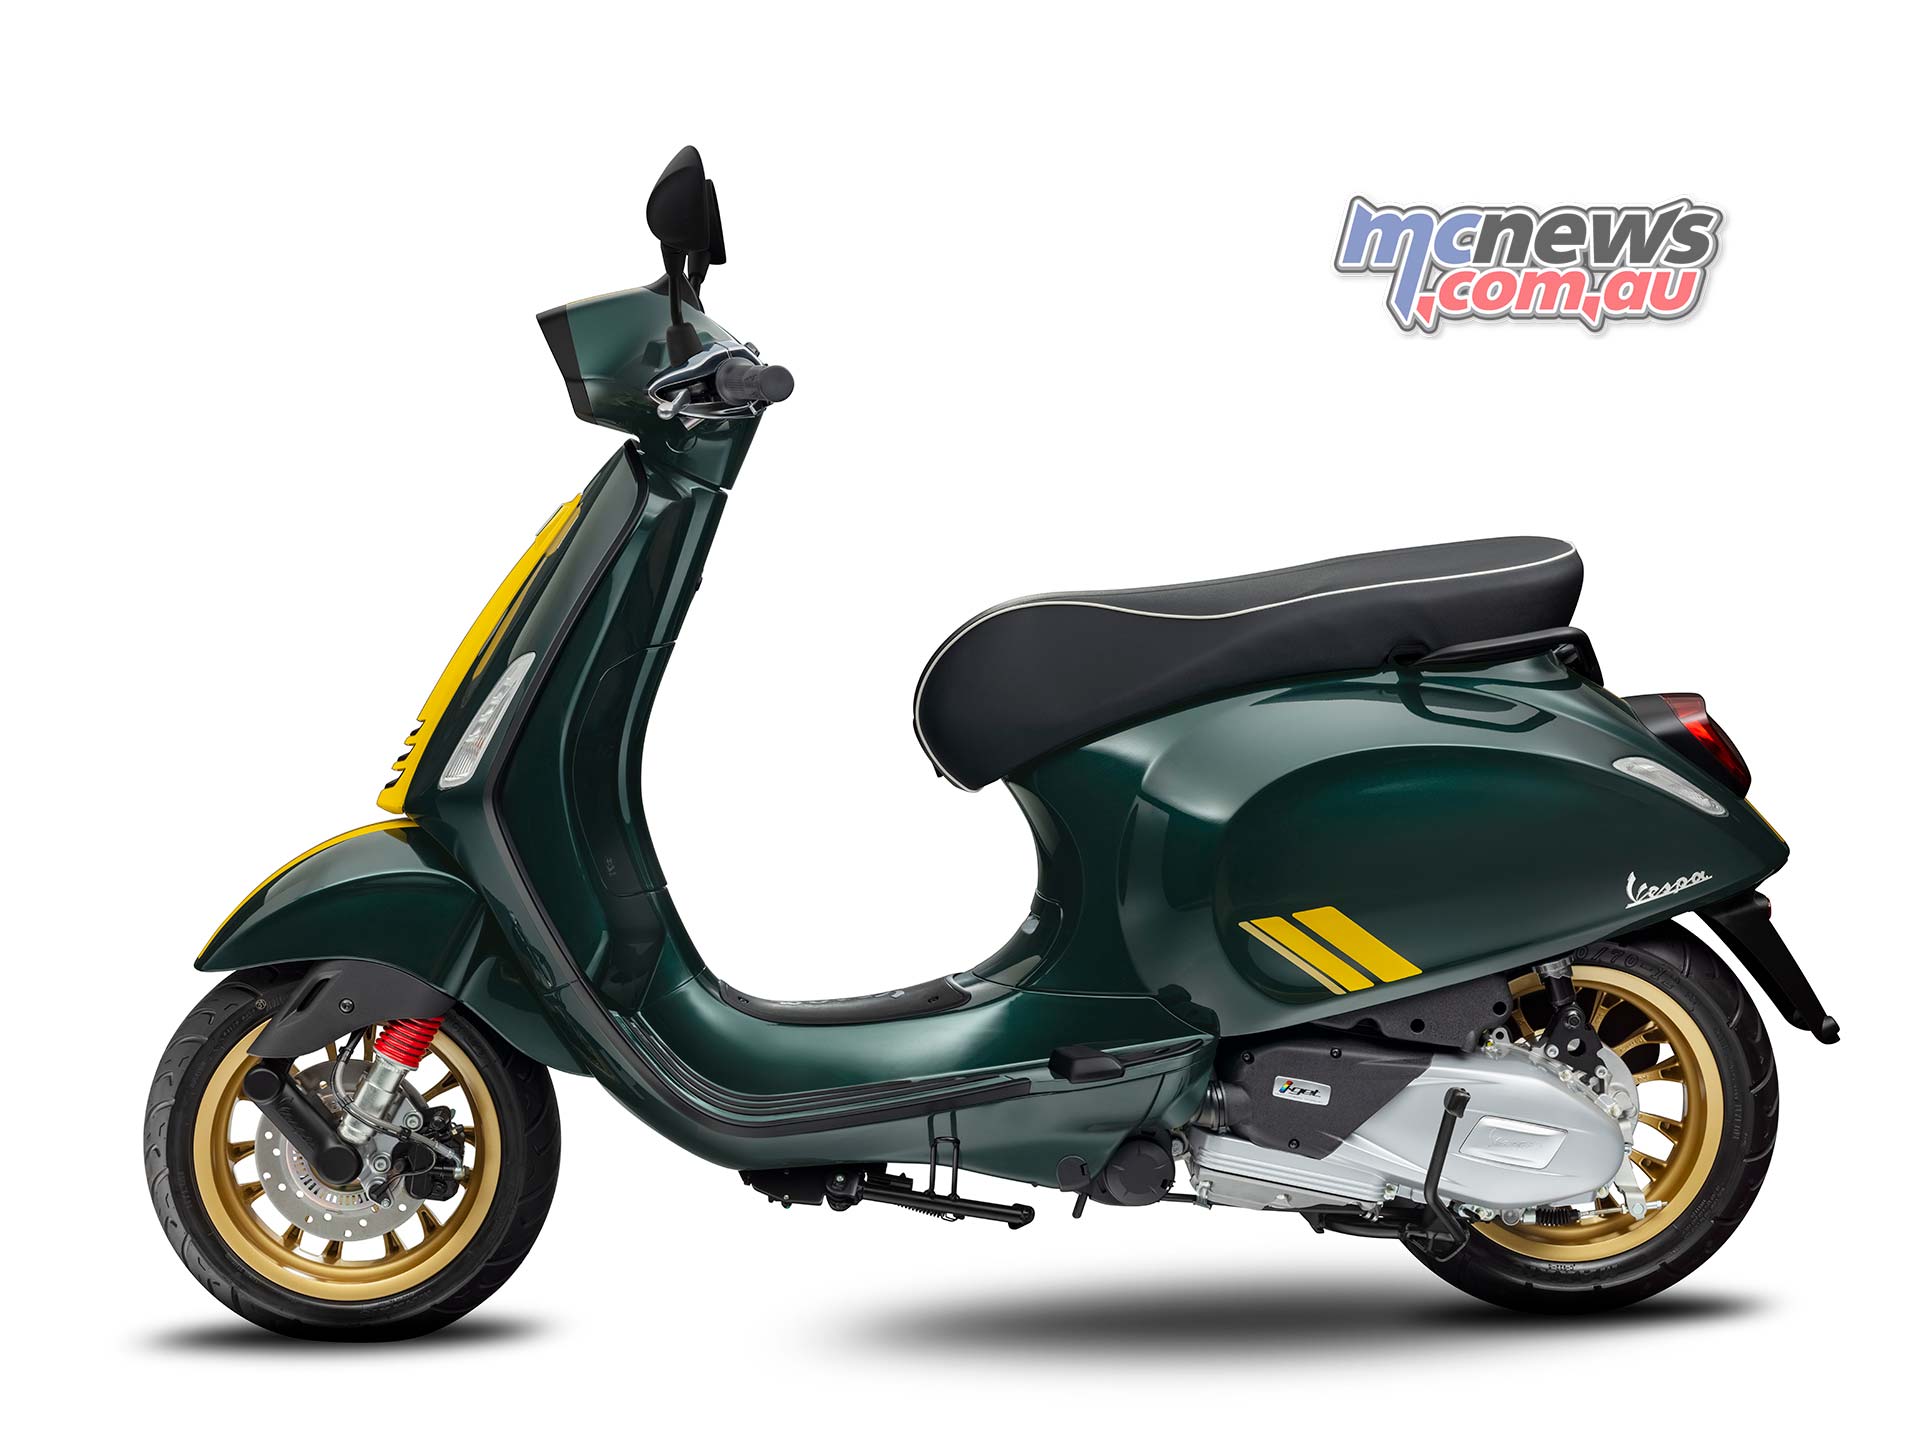  Vespa  puts 1960s racing  liveries on new scooters MCNews